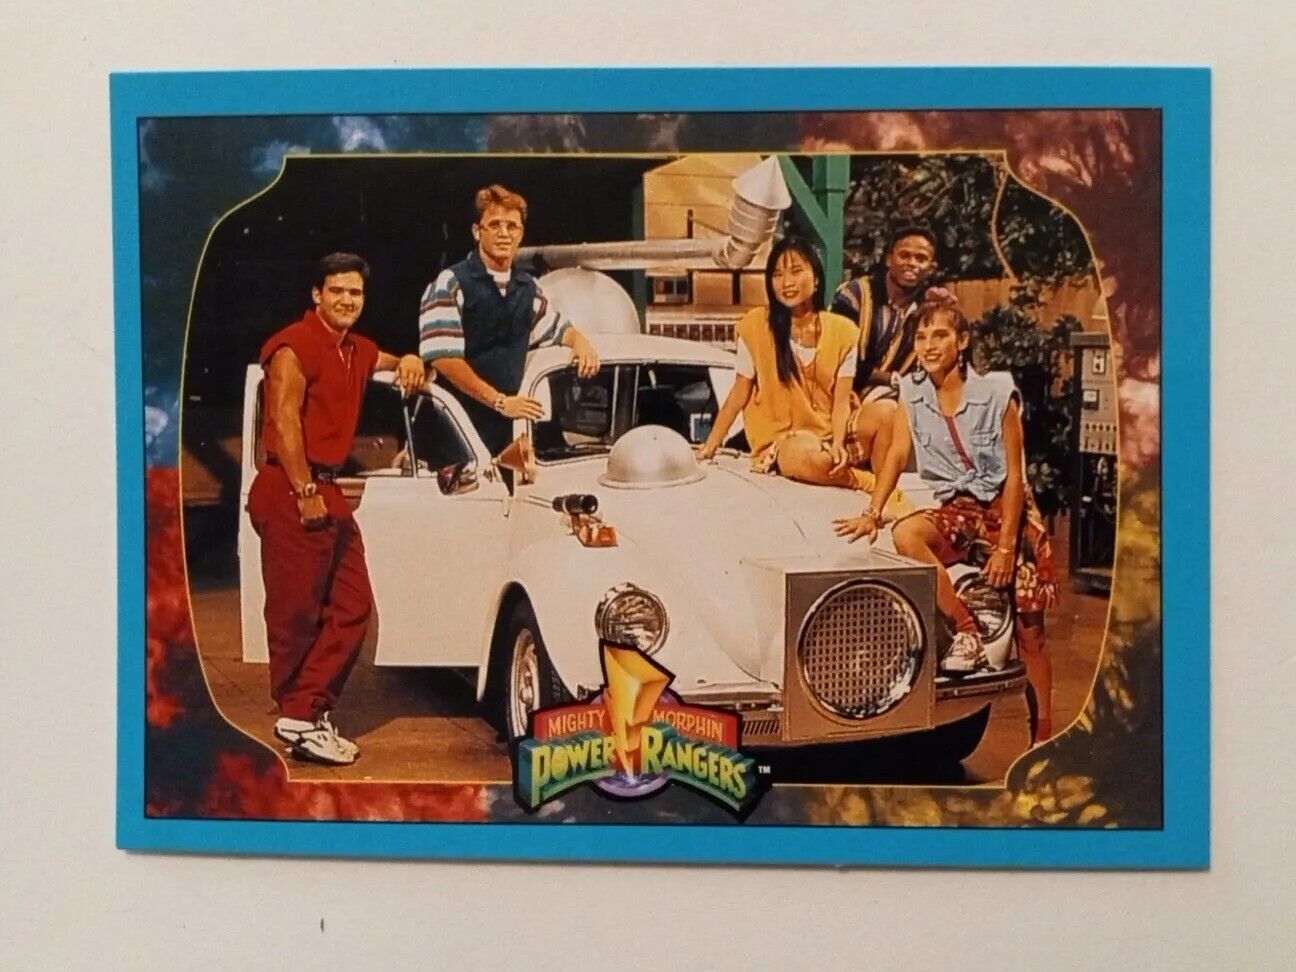 1994 Mighty Morphin Power Rangers Trading Card #1 Field Trip